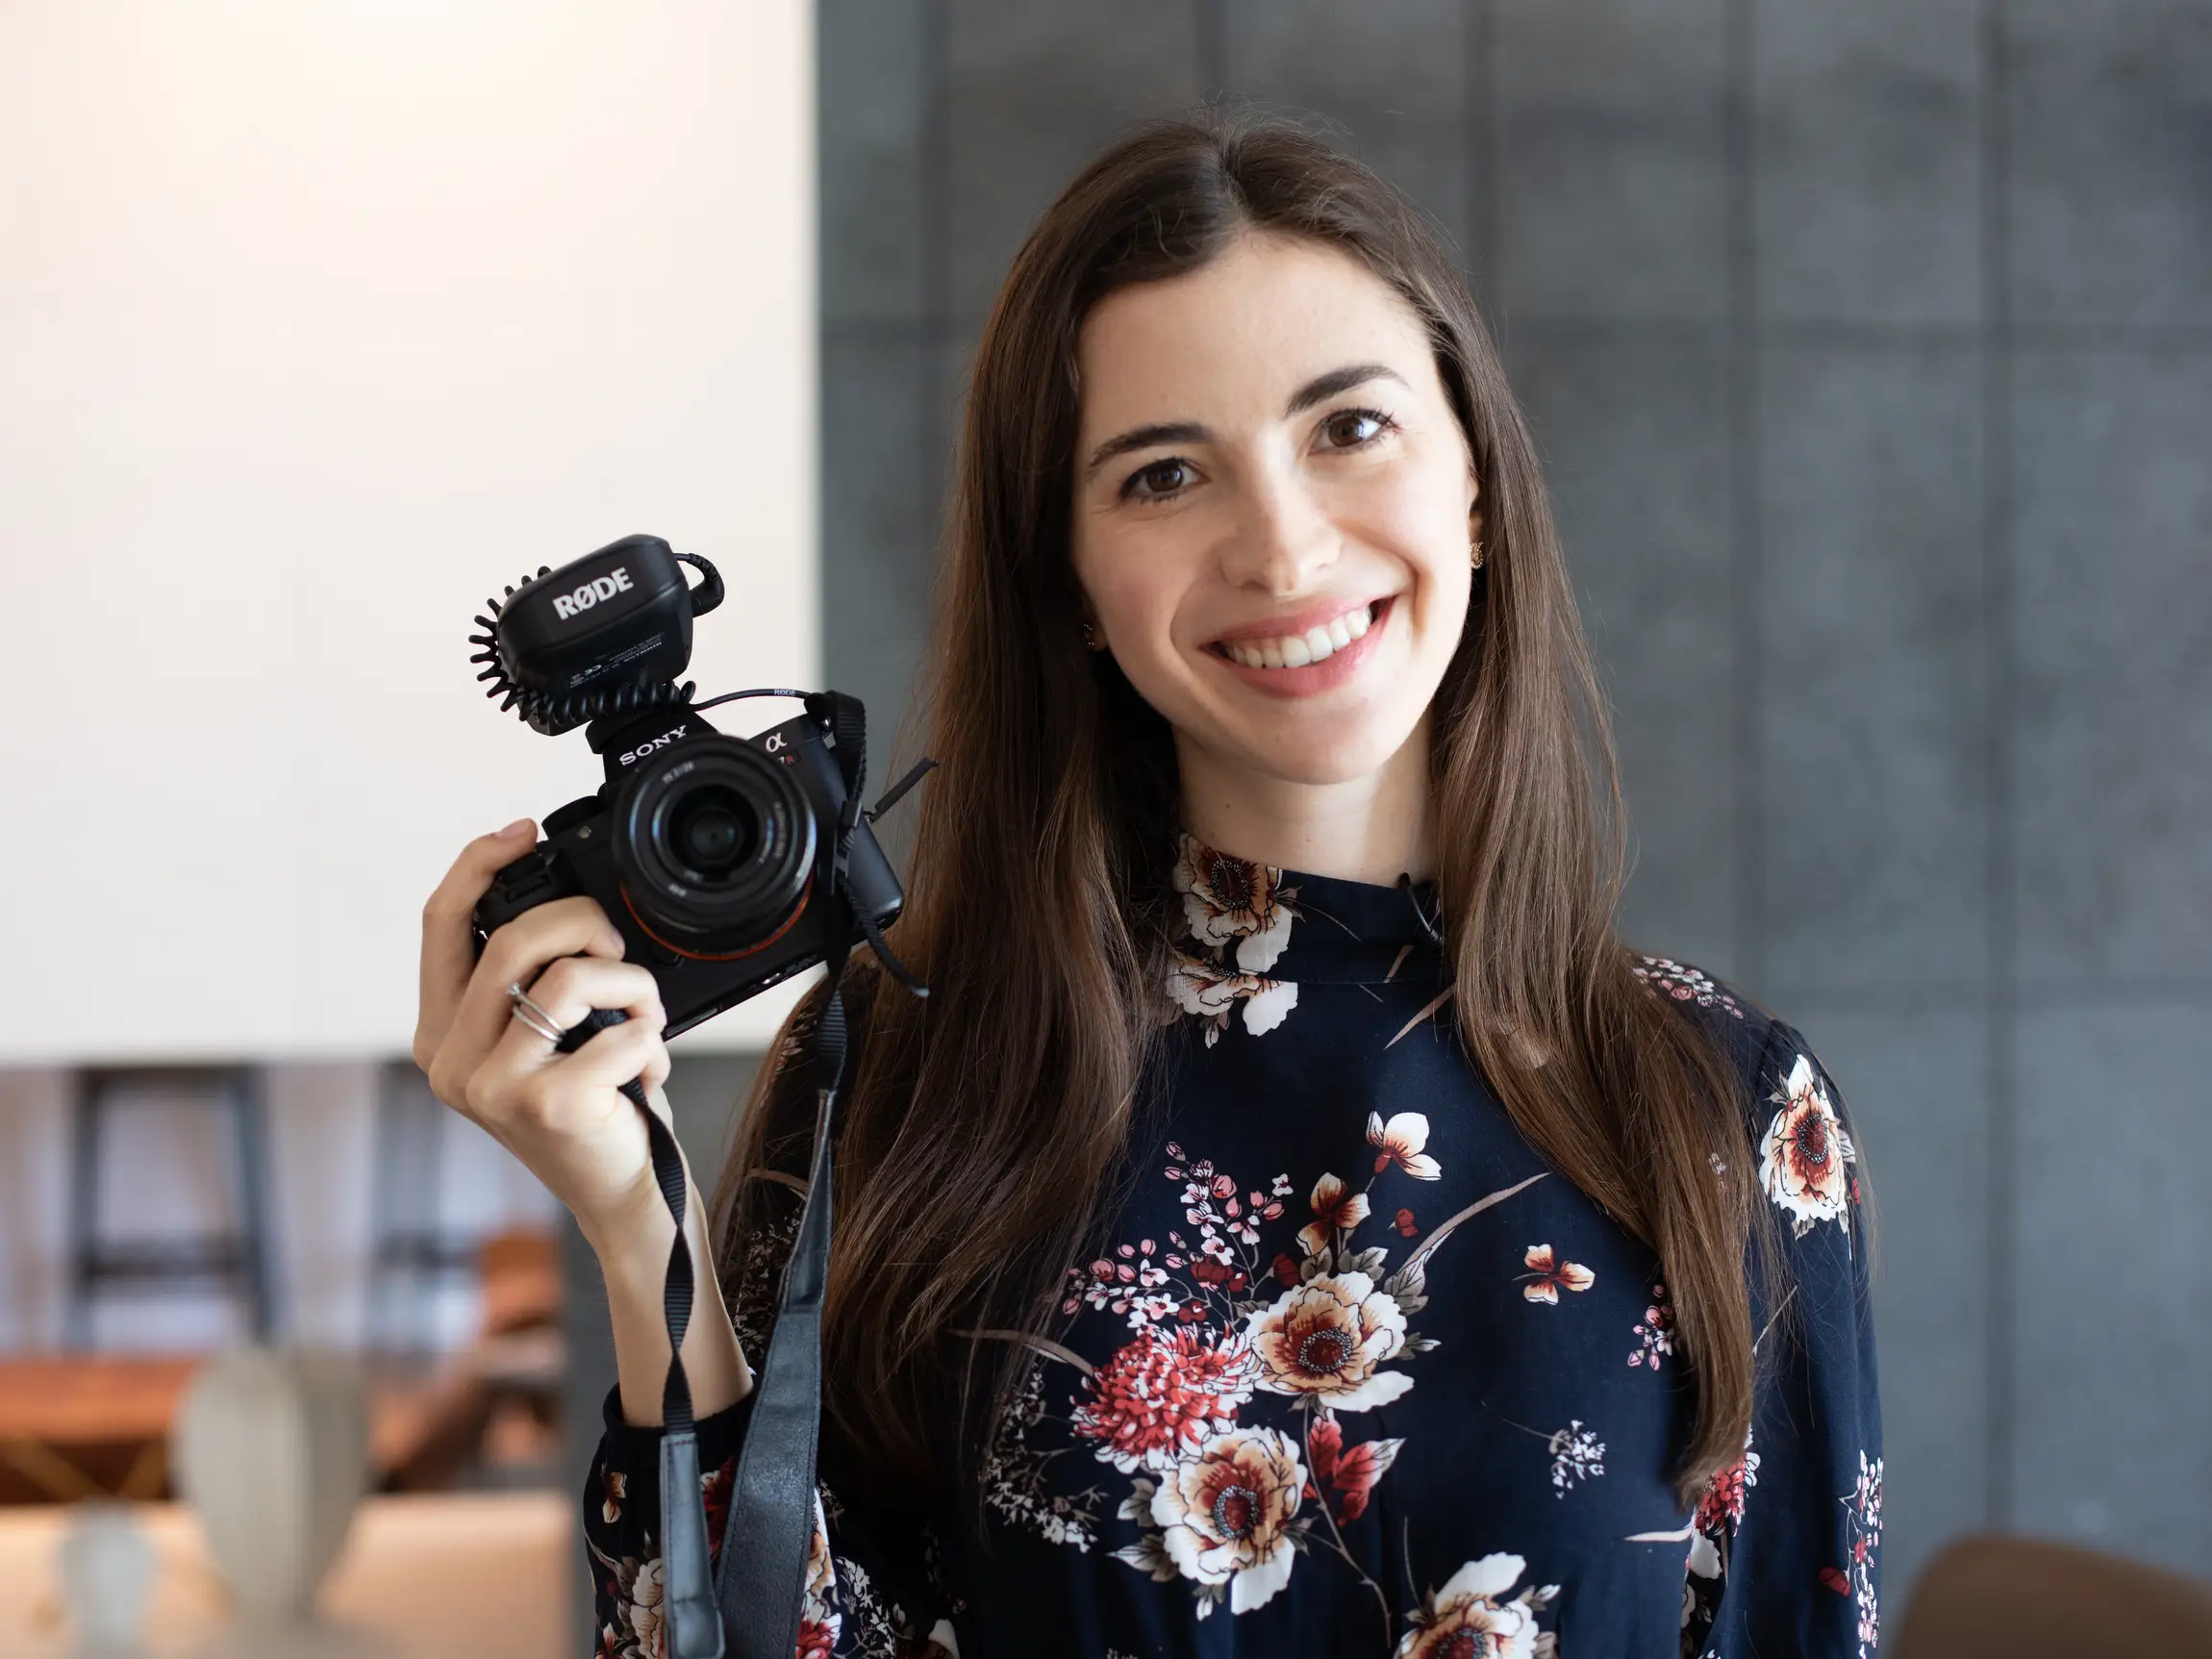 How to become a successful influencer, according to YouTube and Instagram stars